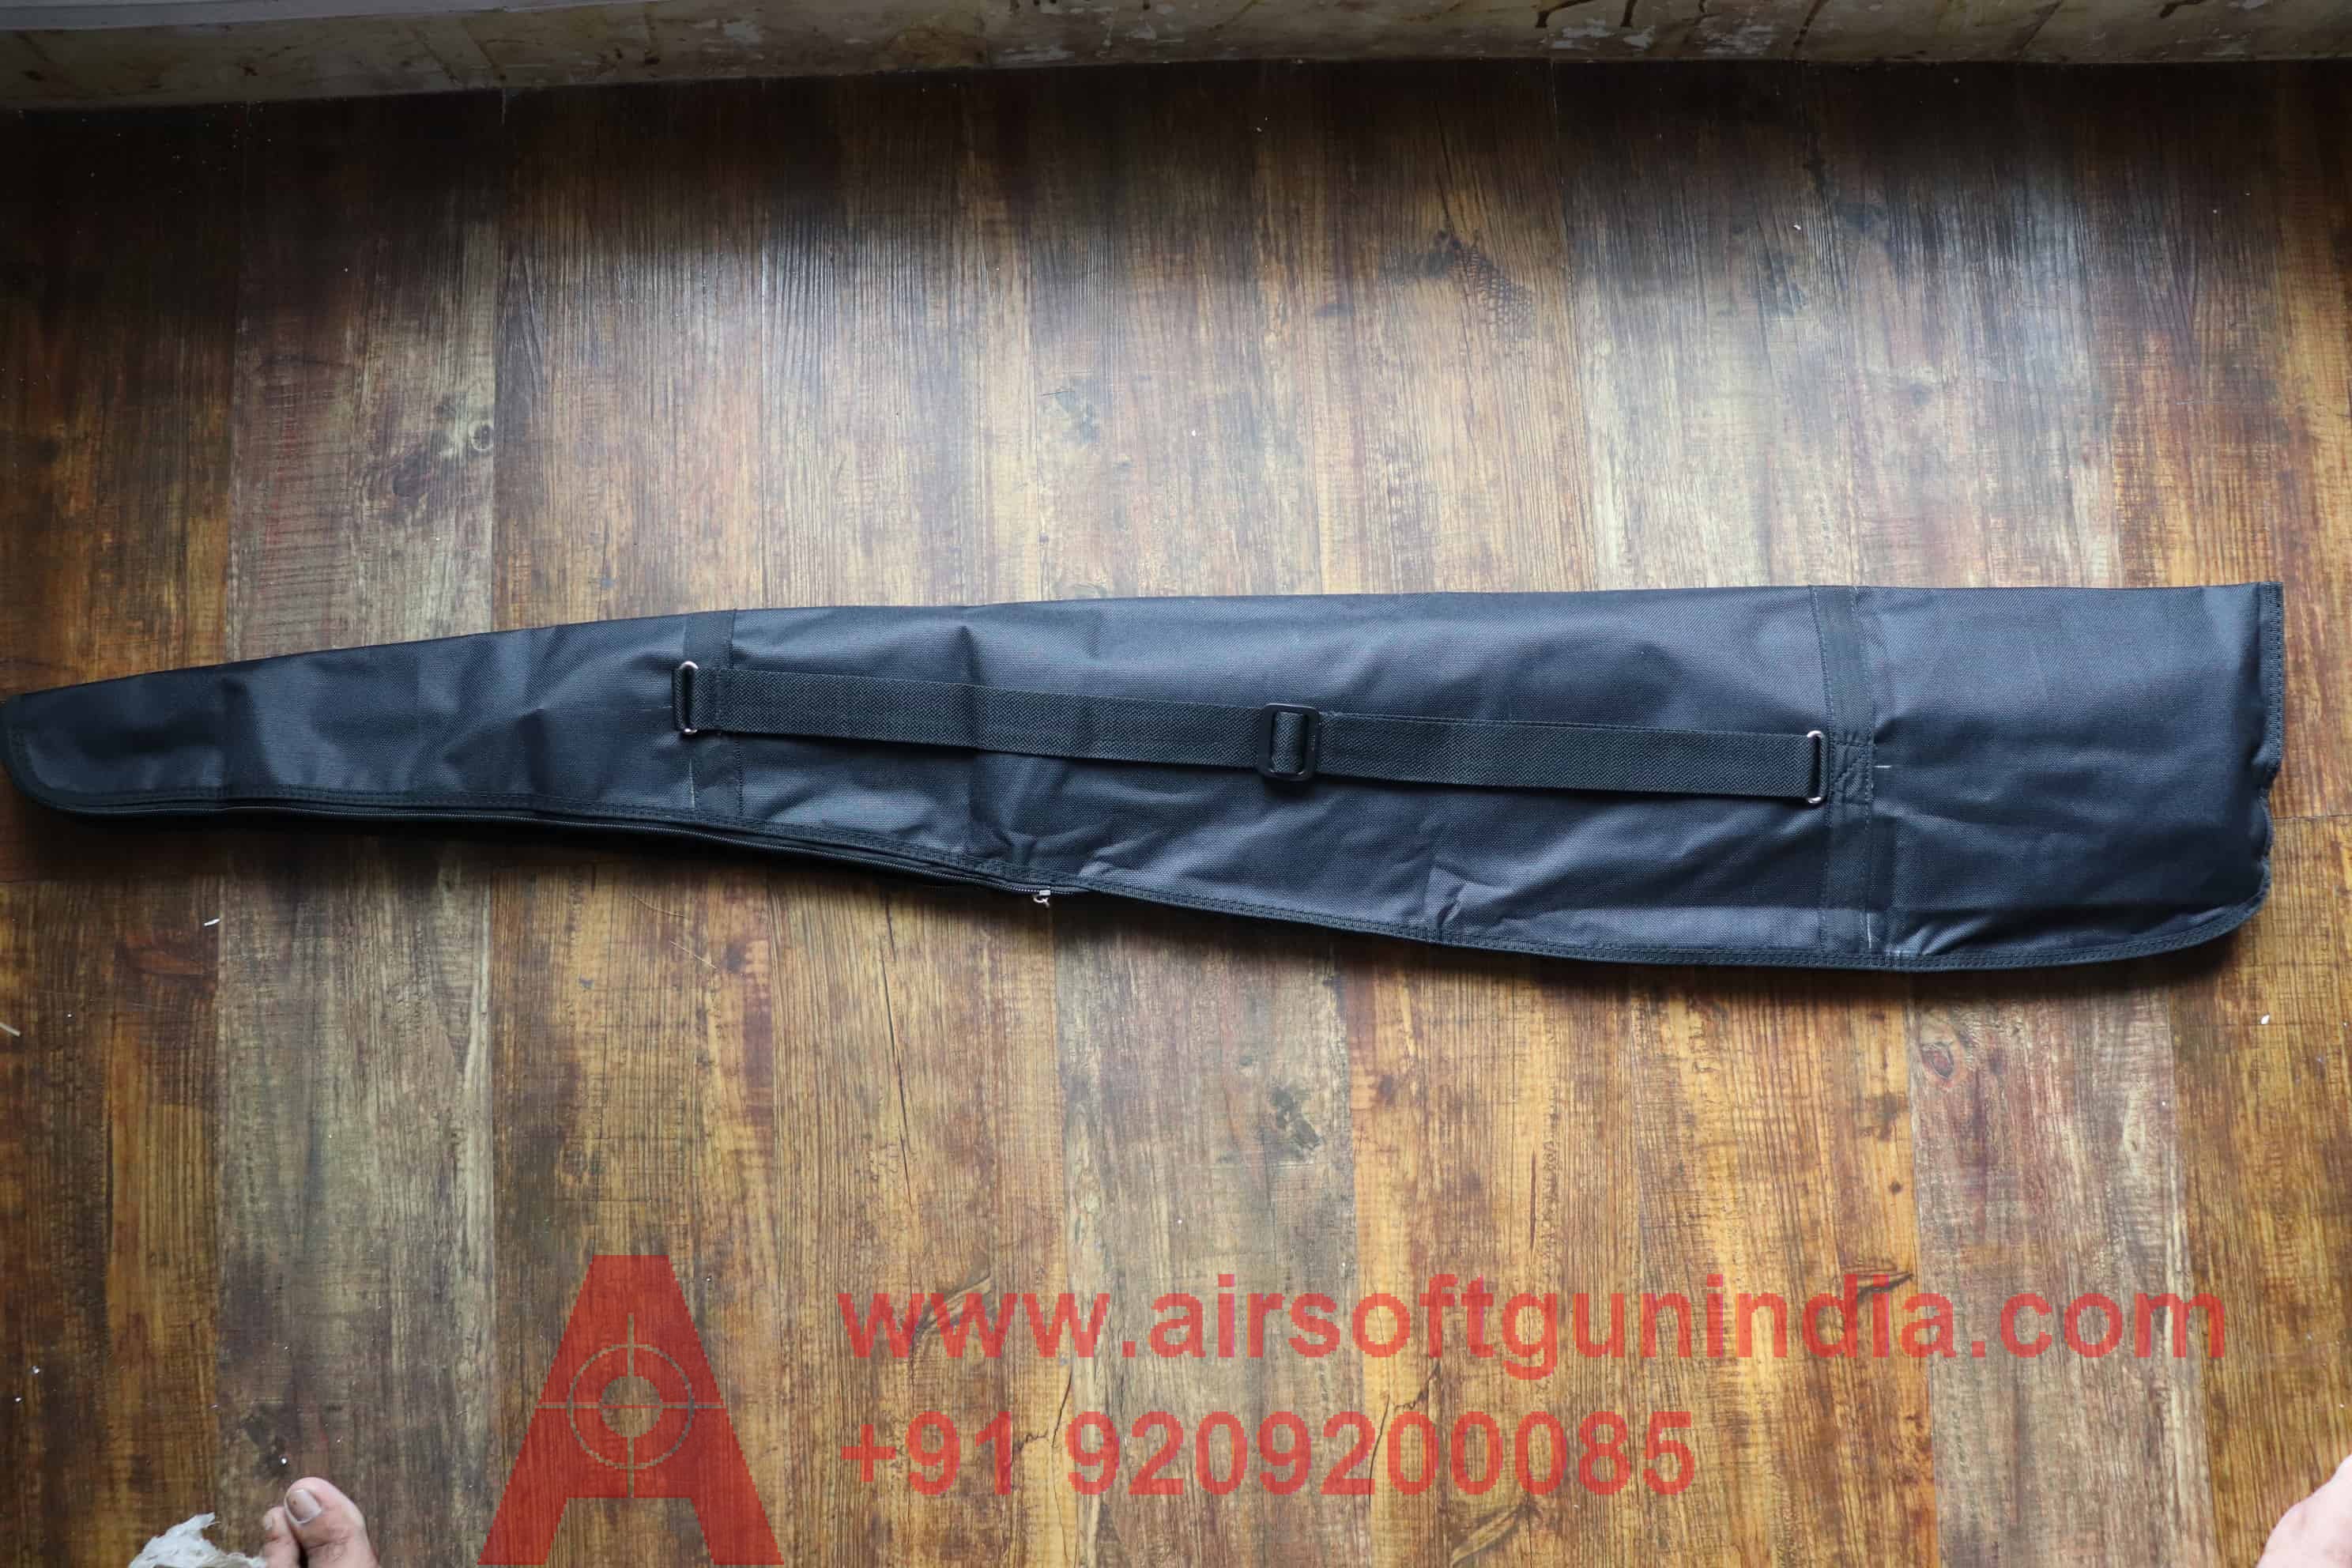 RIFLE COVER FOR AIR RIFLE IN INDIA